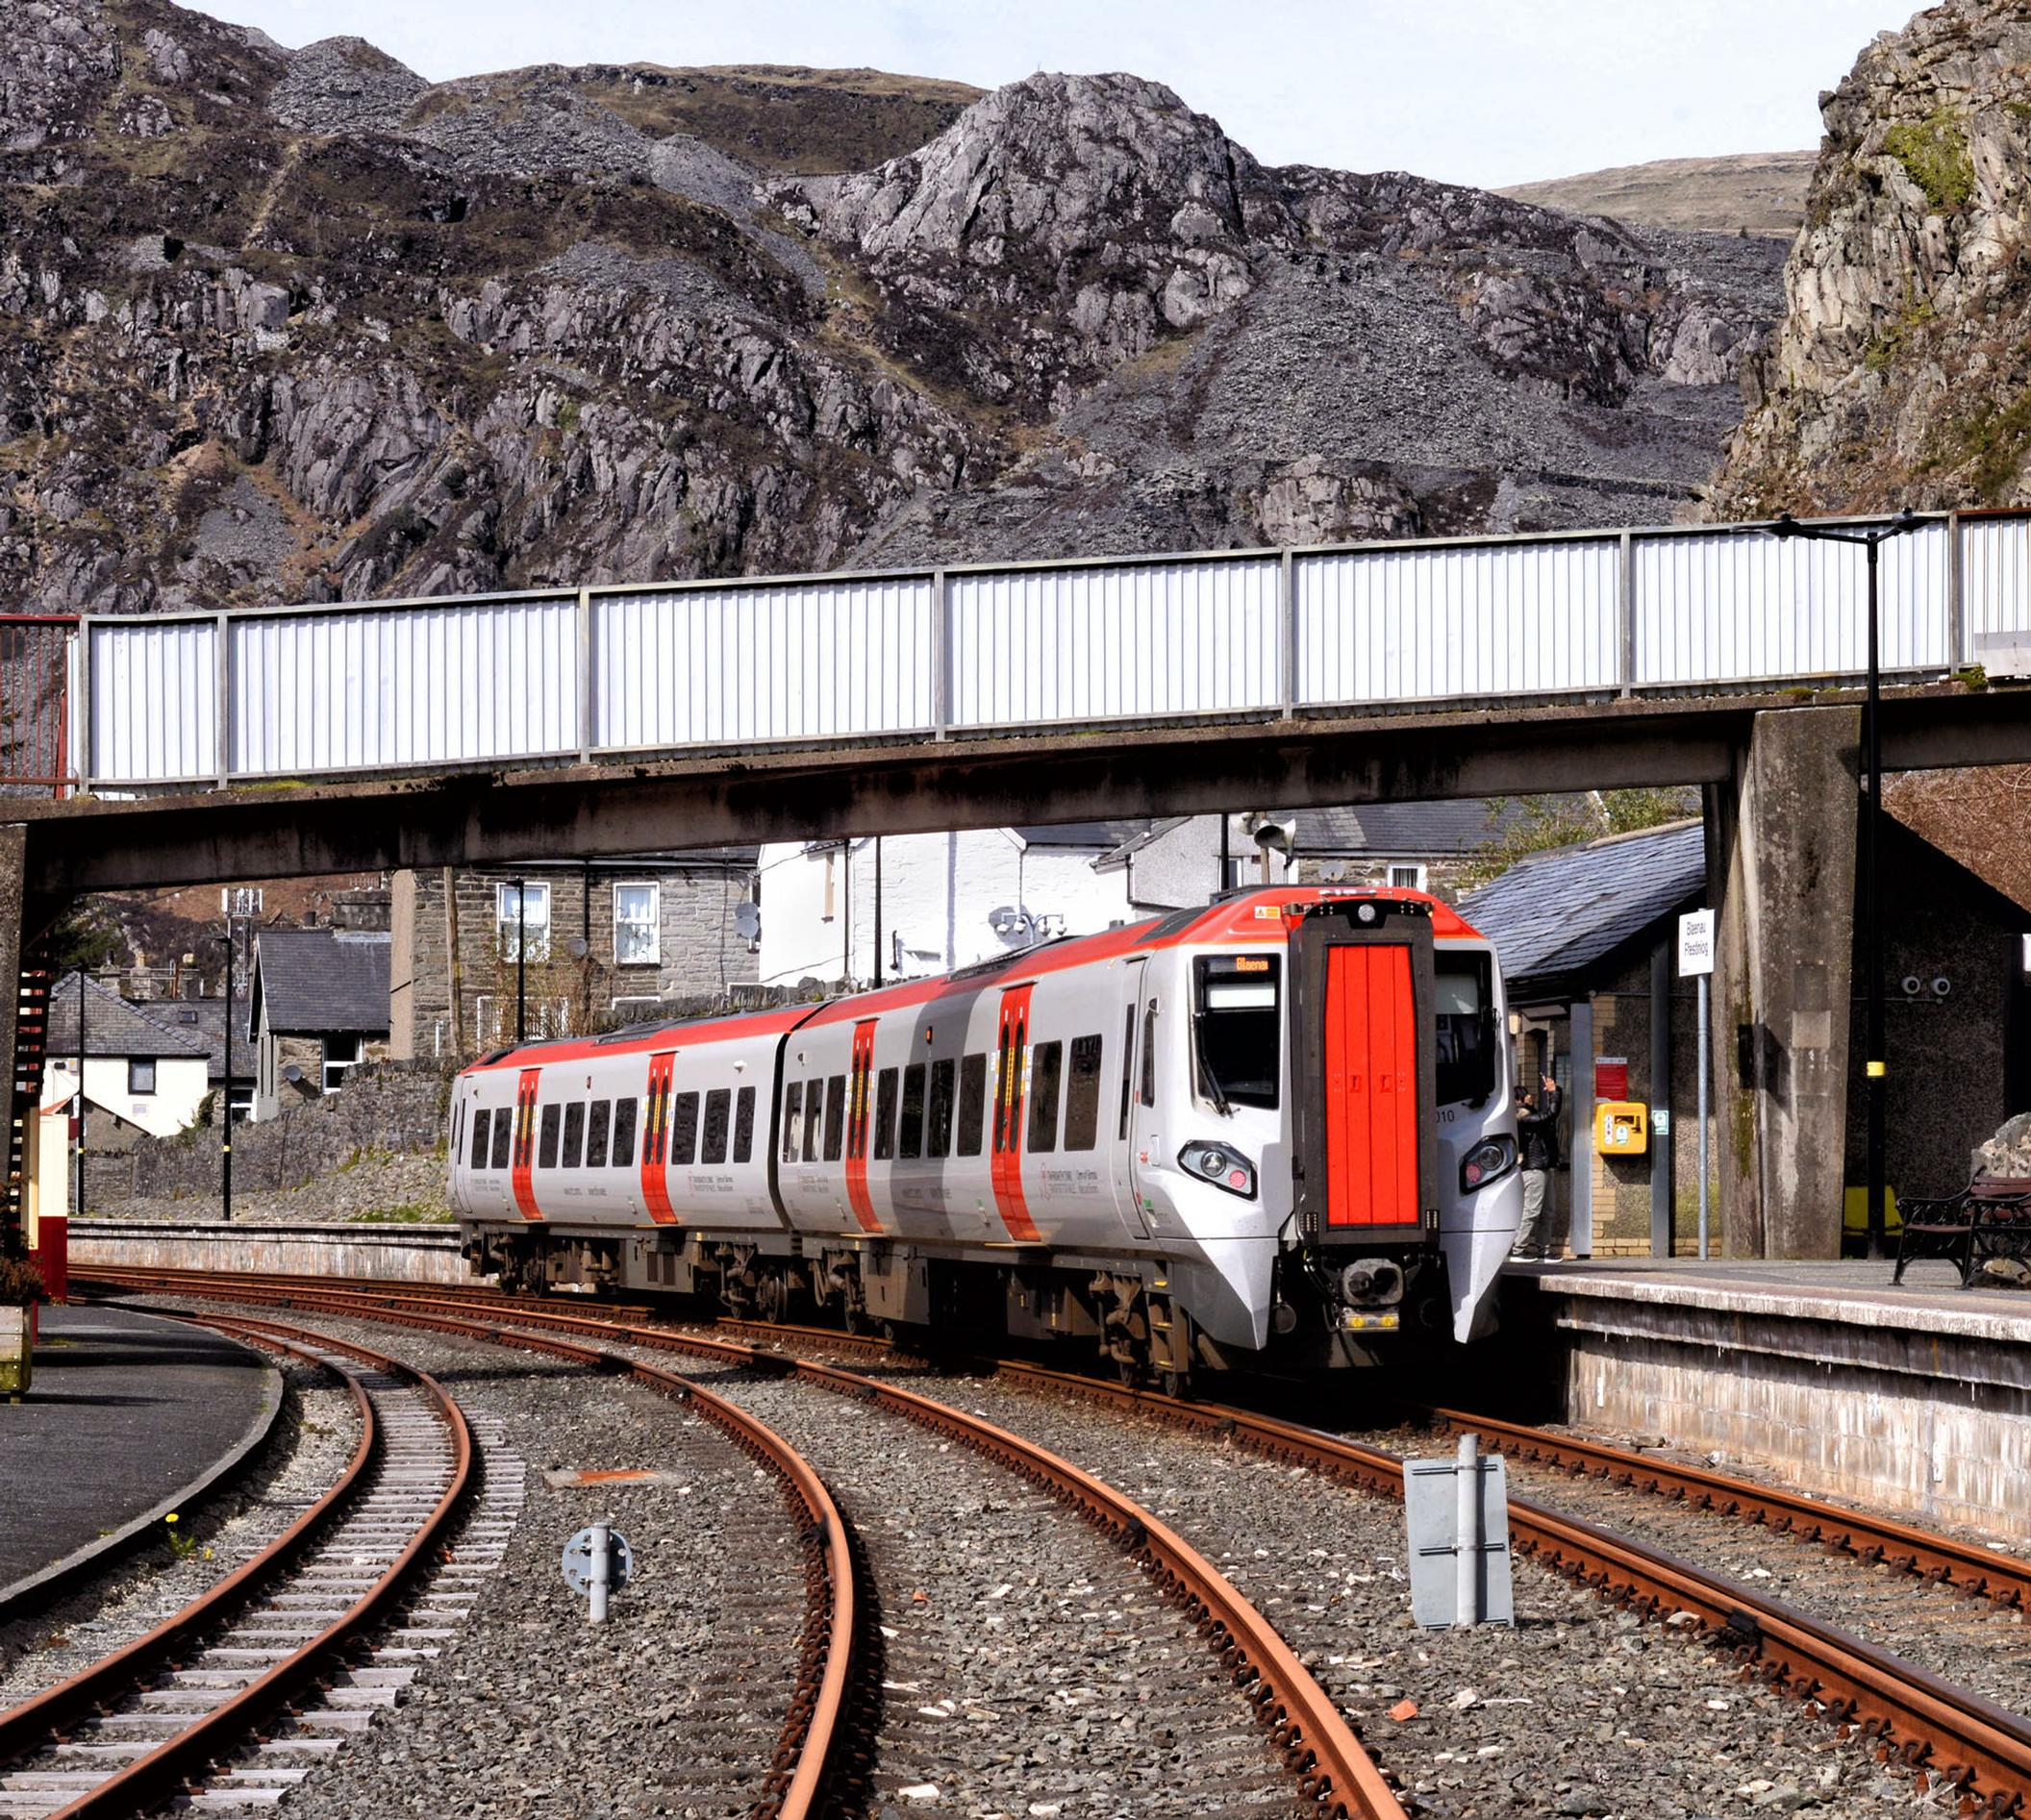 New trains, such as this one at Blaenau Ffestiniog, have increased TfW’s costs